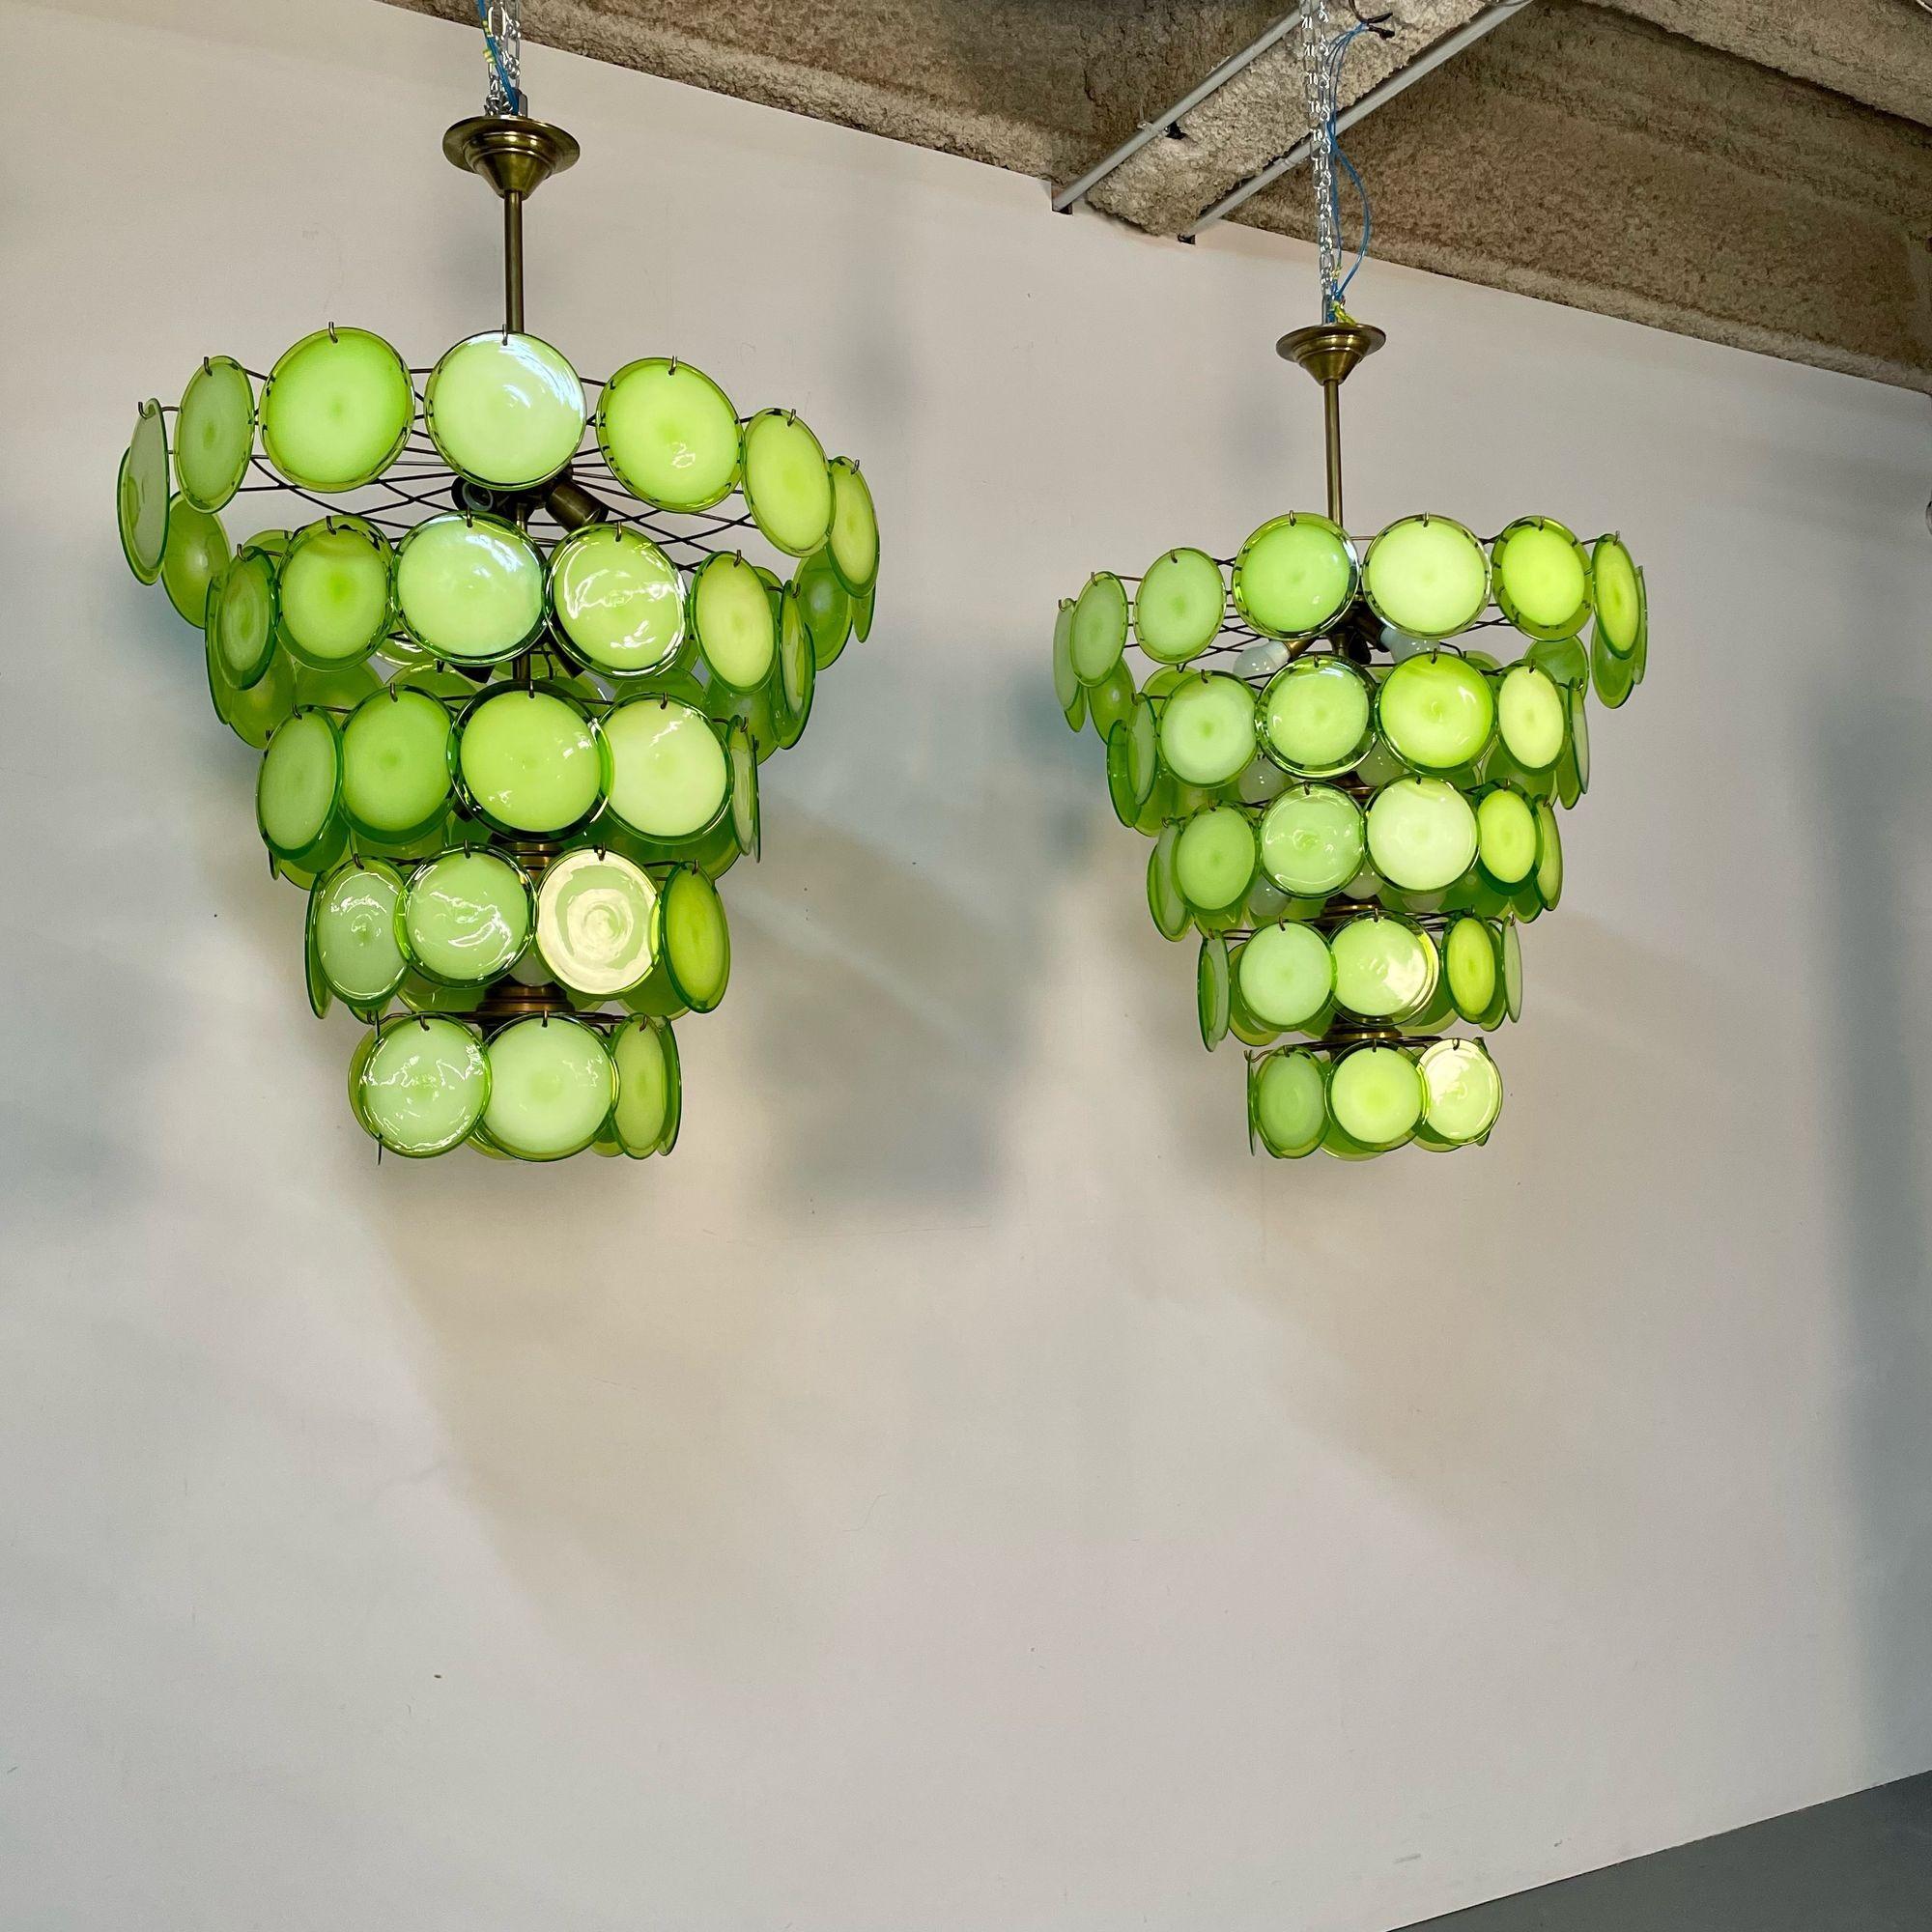 Pair Apple Green Murano Disc Mid-Century Modern Tiered Chandelier, Antiqued Brass, New Wired; Multiple Colors Avaiable
 
After purchasing a small factory of circa 1950/60s Murano Discs in Italy we have started to manufacture our own 2020 frames.